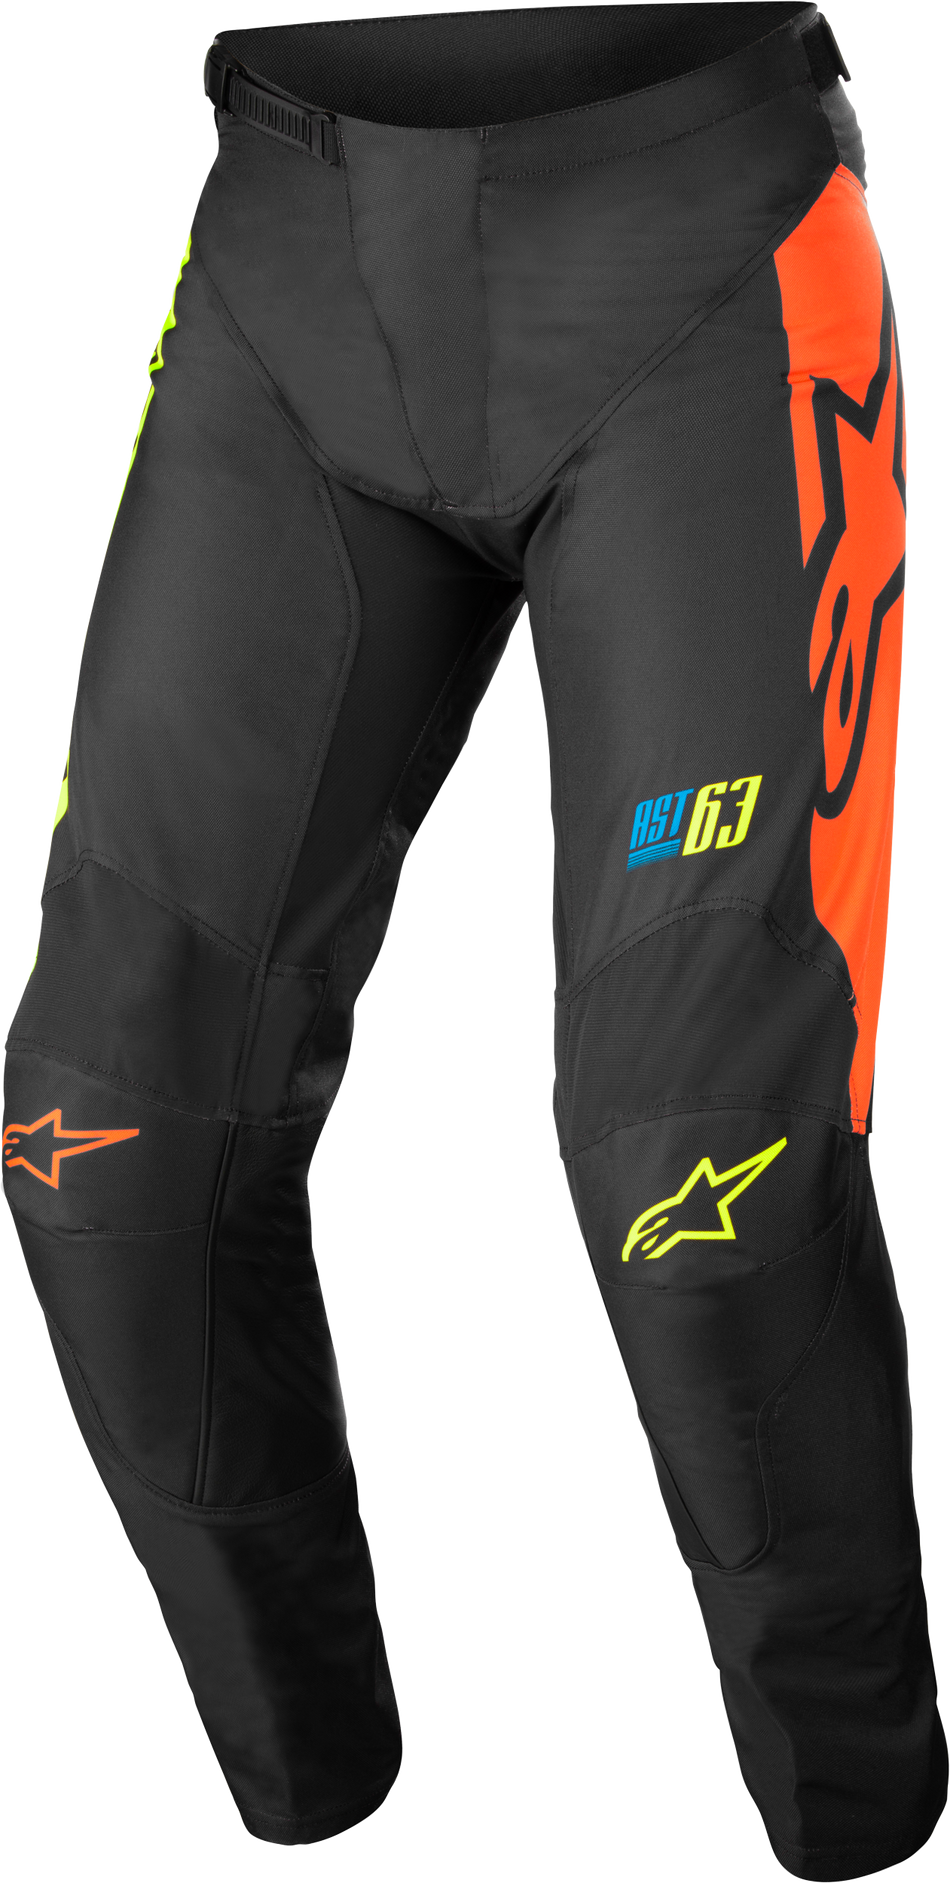 ALPINESTARS Youth Racer Compass Pants Black/Yellow Fluo/Coral Sz 22 3742122-1534-22